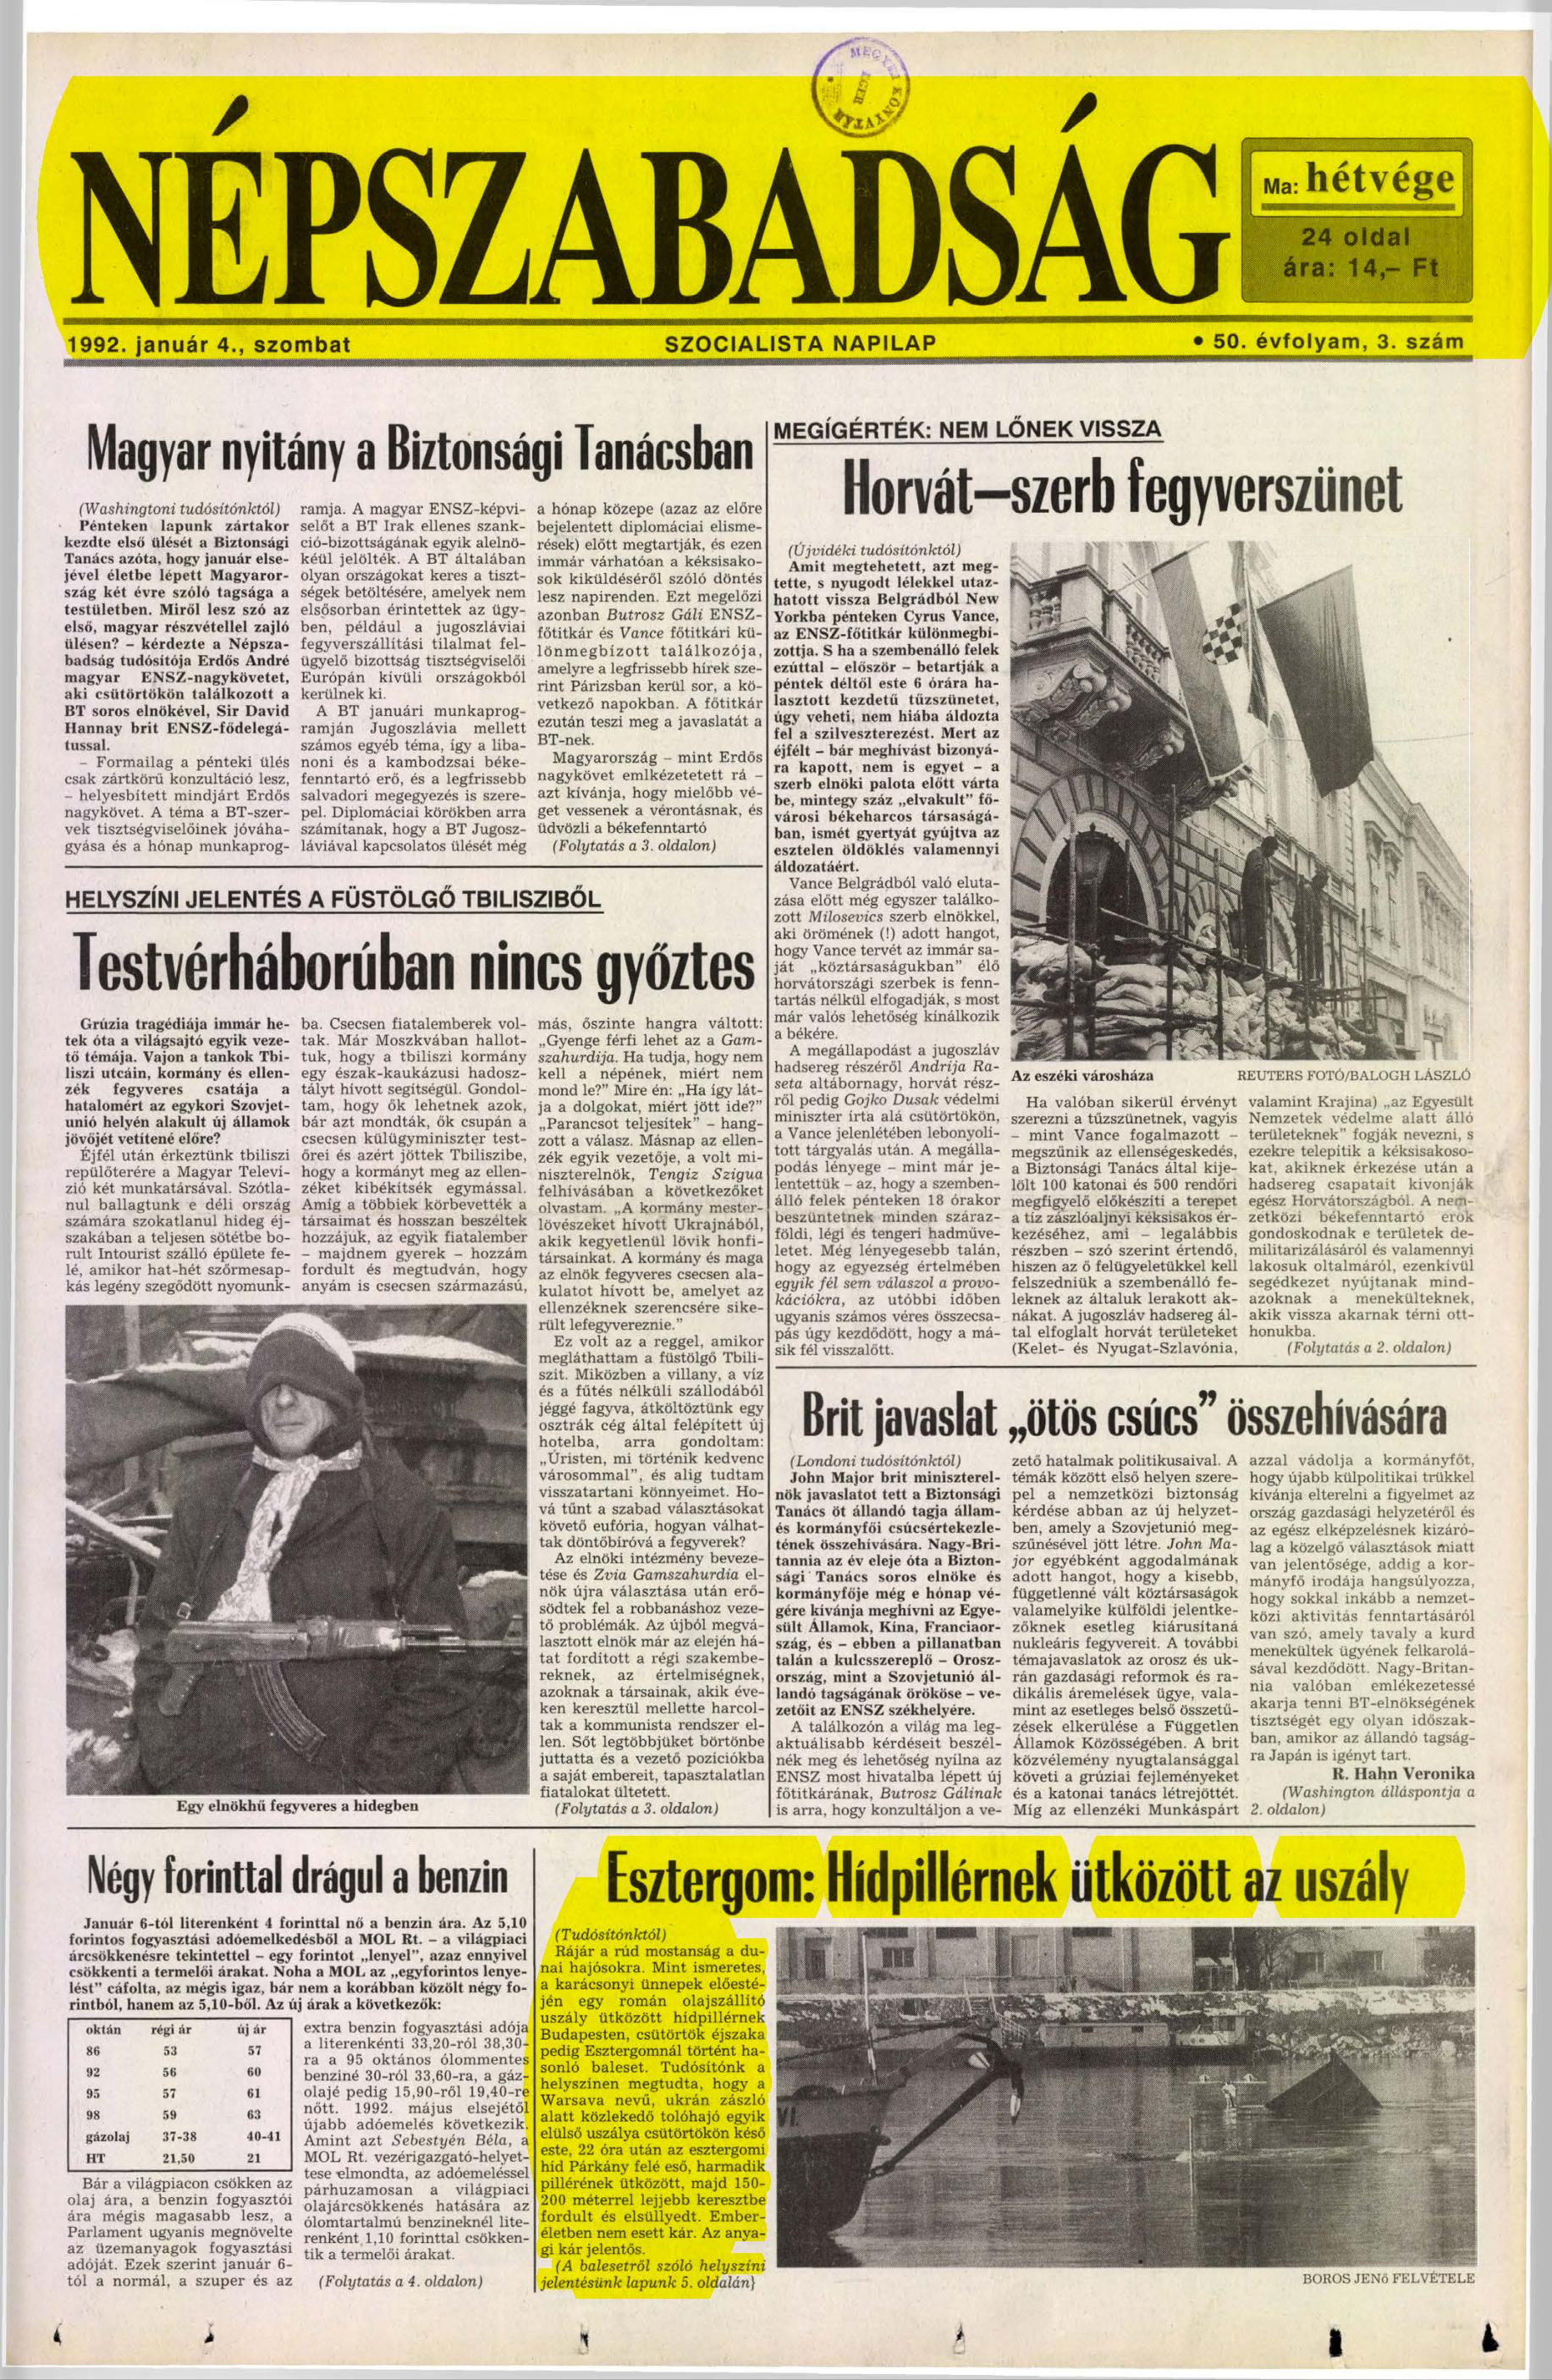 nepszabadsag_1992_01_pages40-40-page-001.jpg